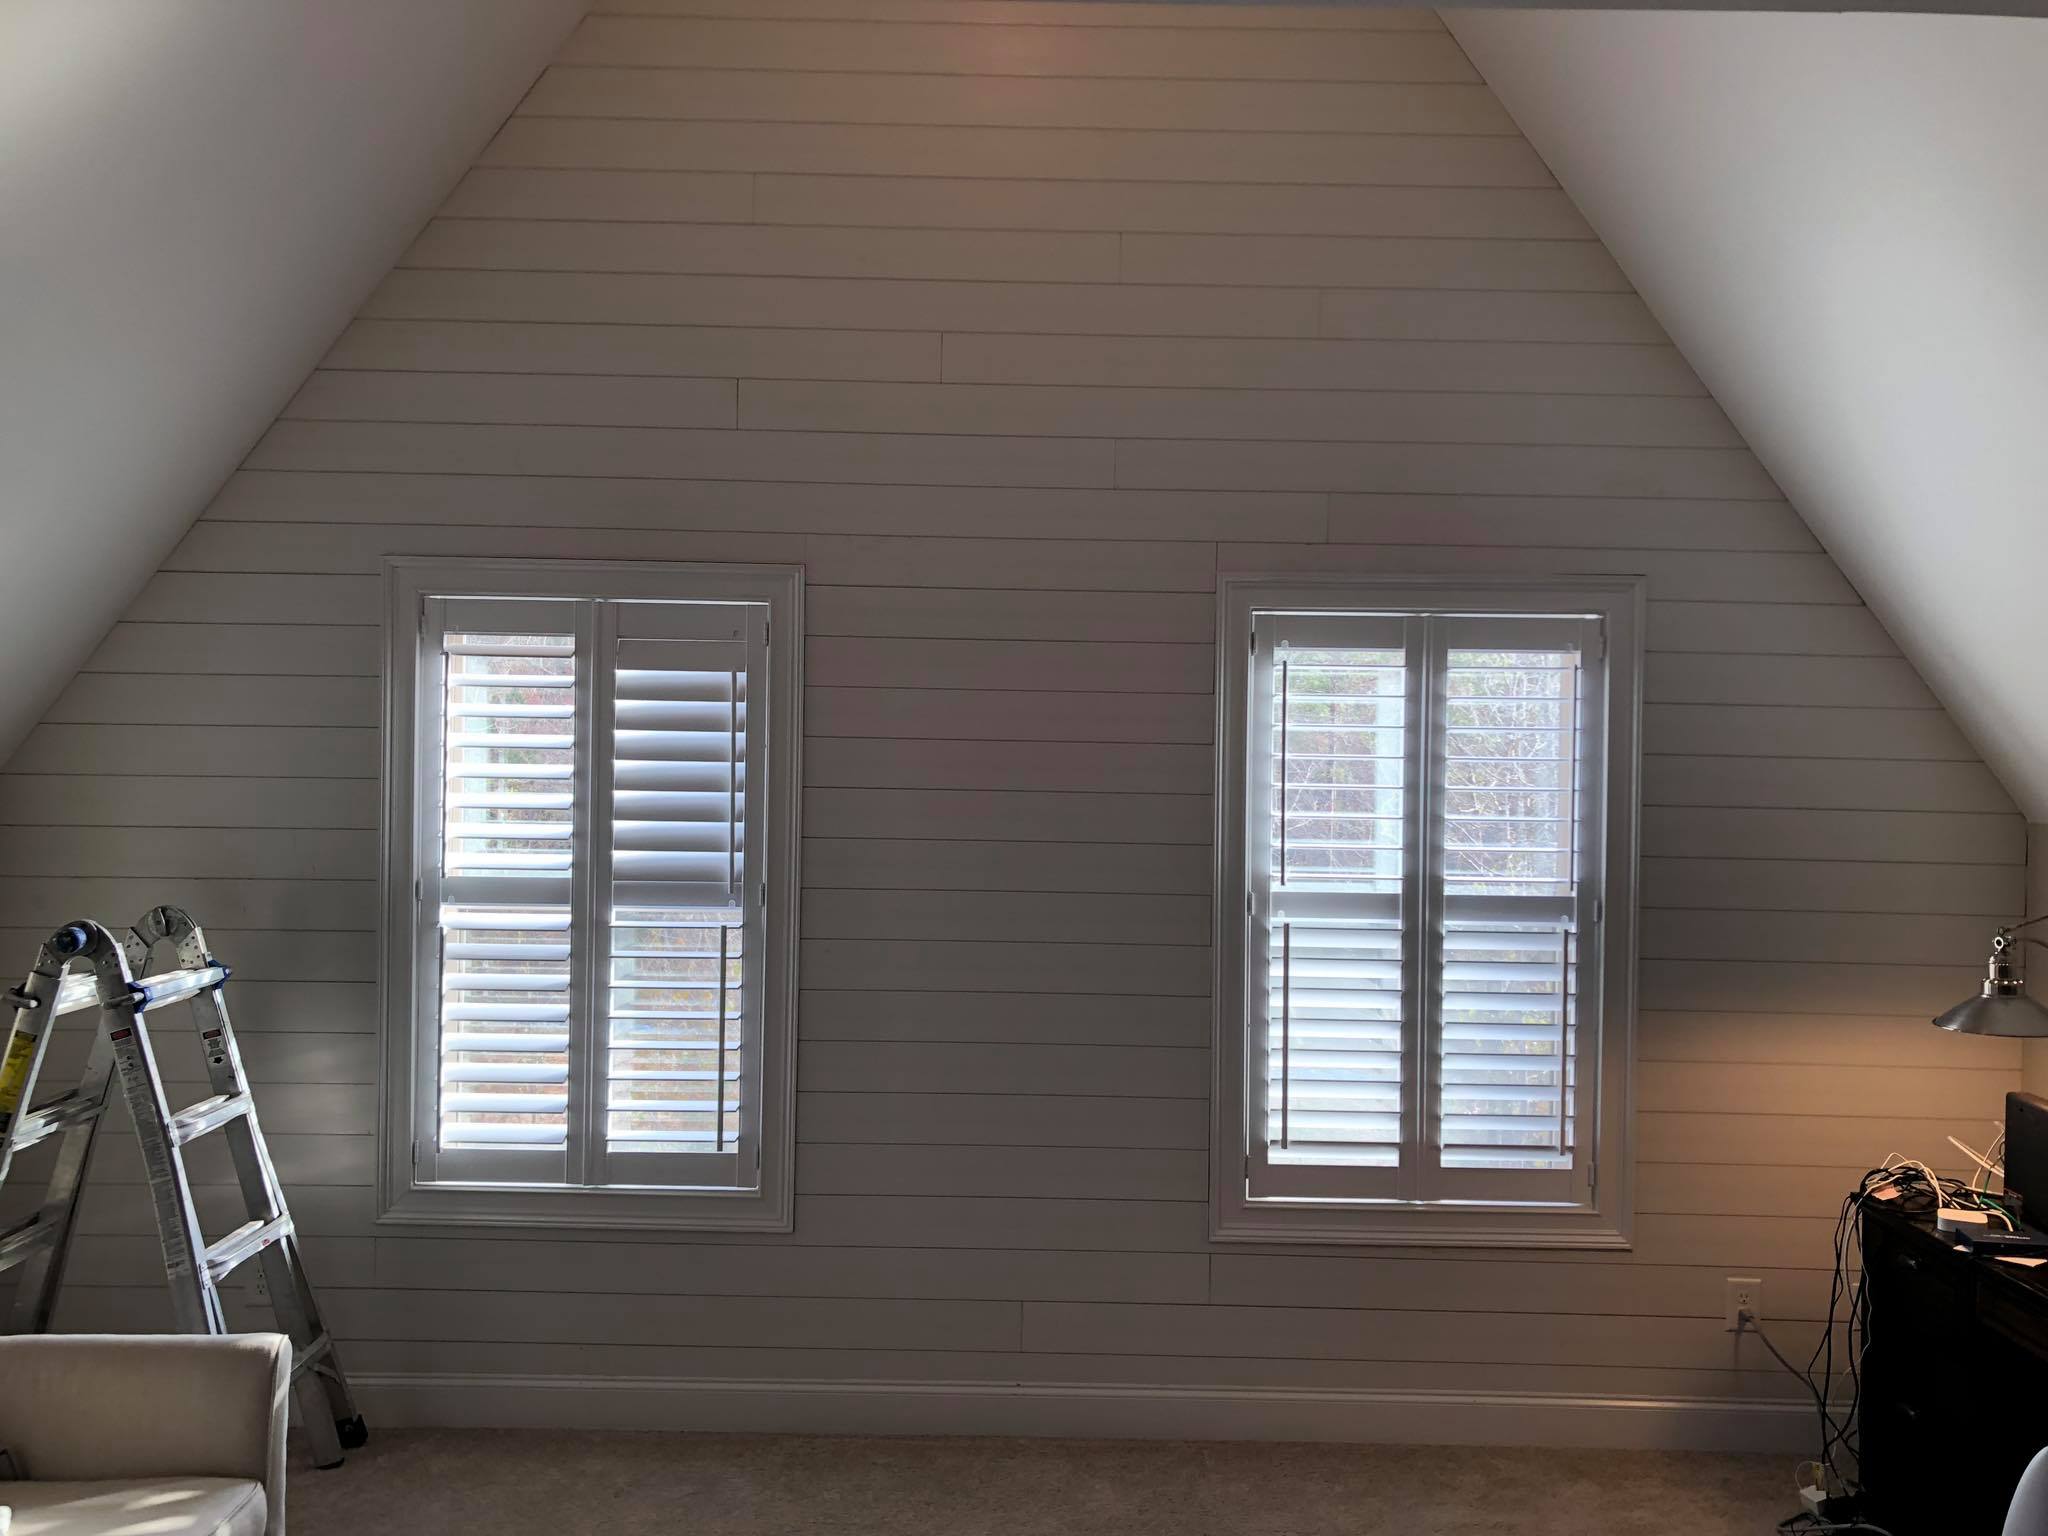 Shiplap On Walls Painted White with Hardwood Floor Installed 3